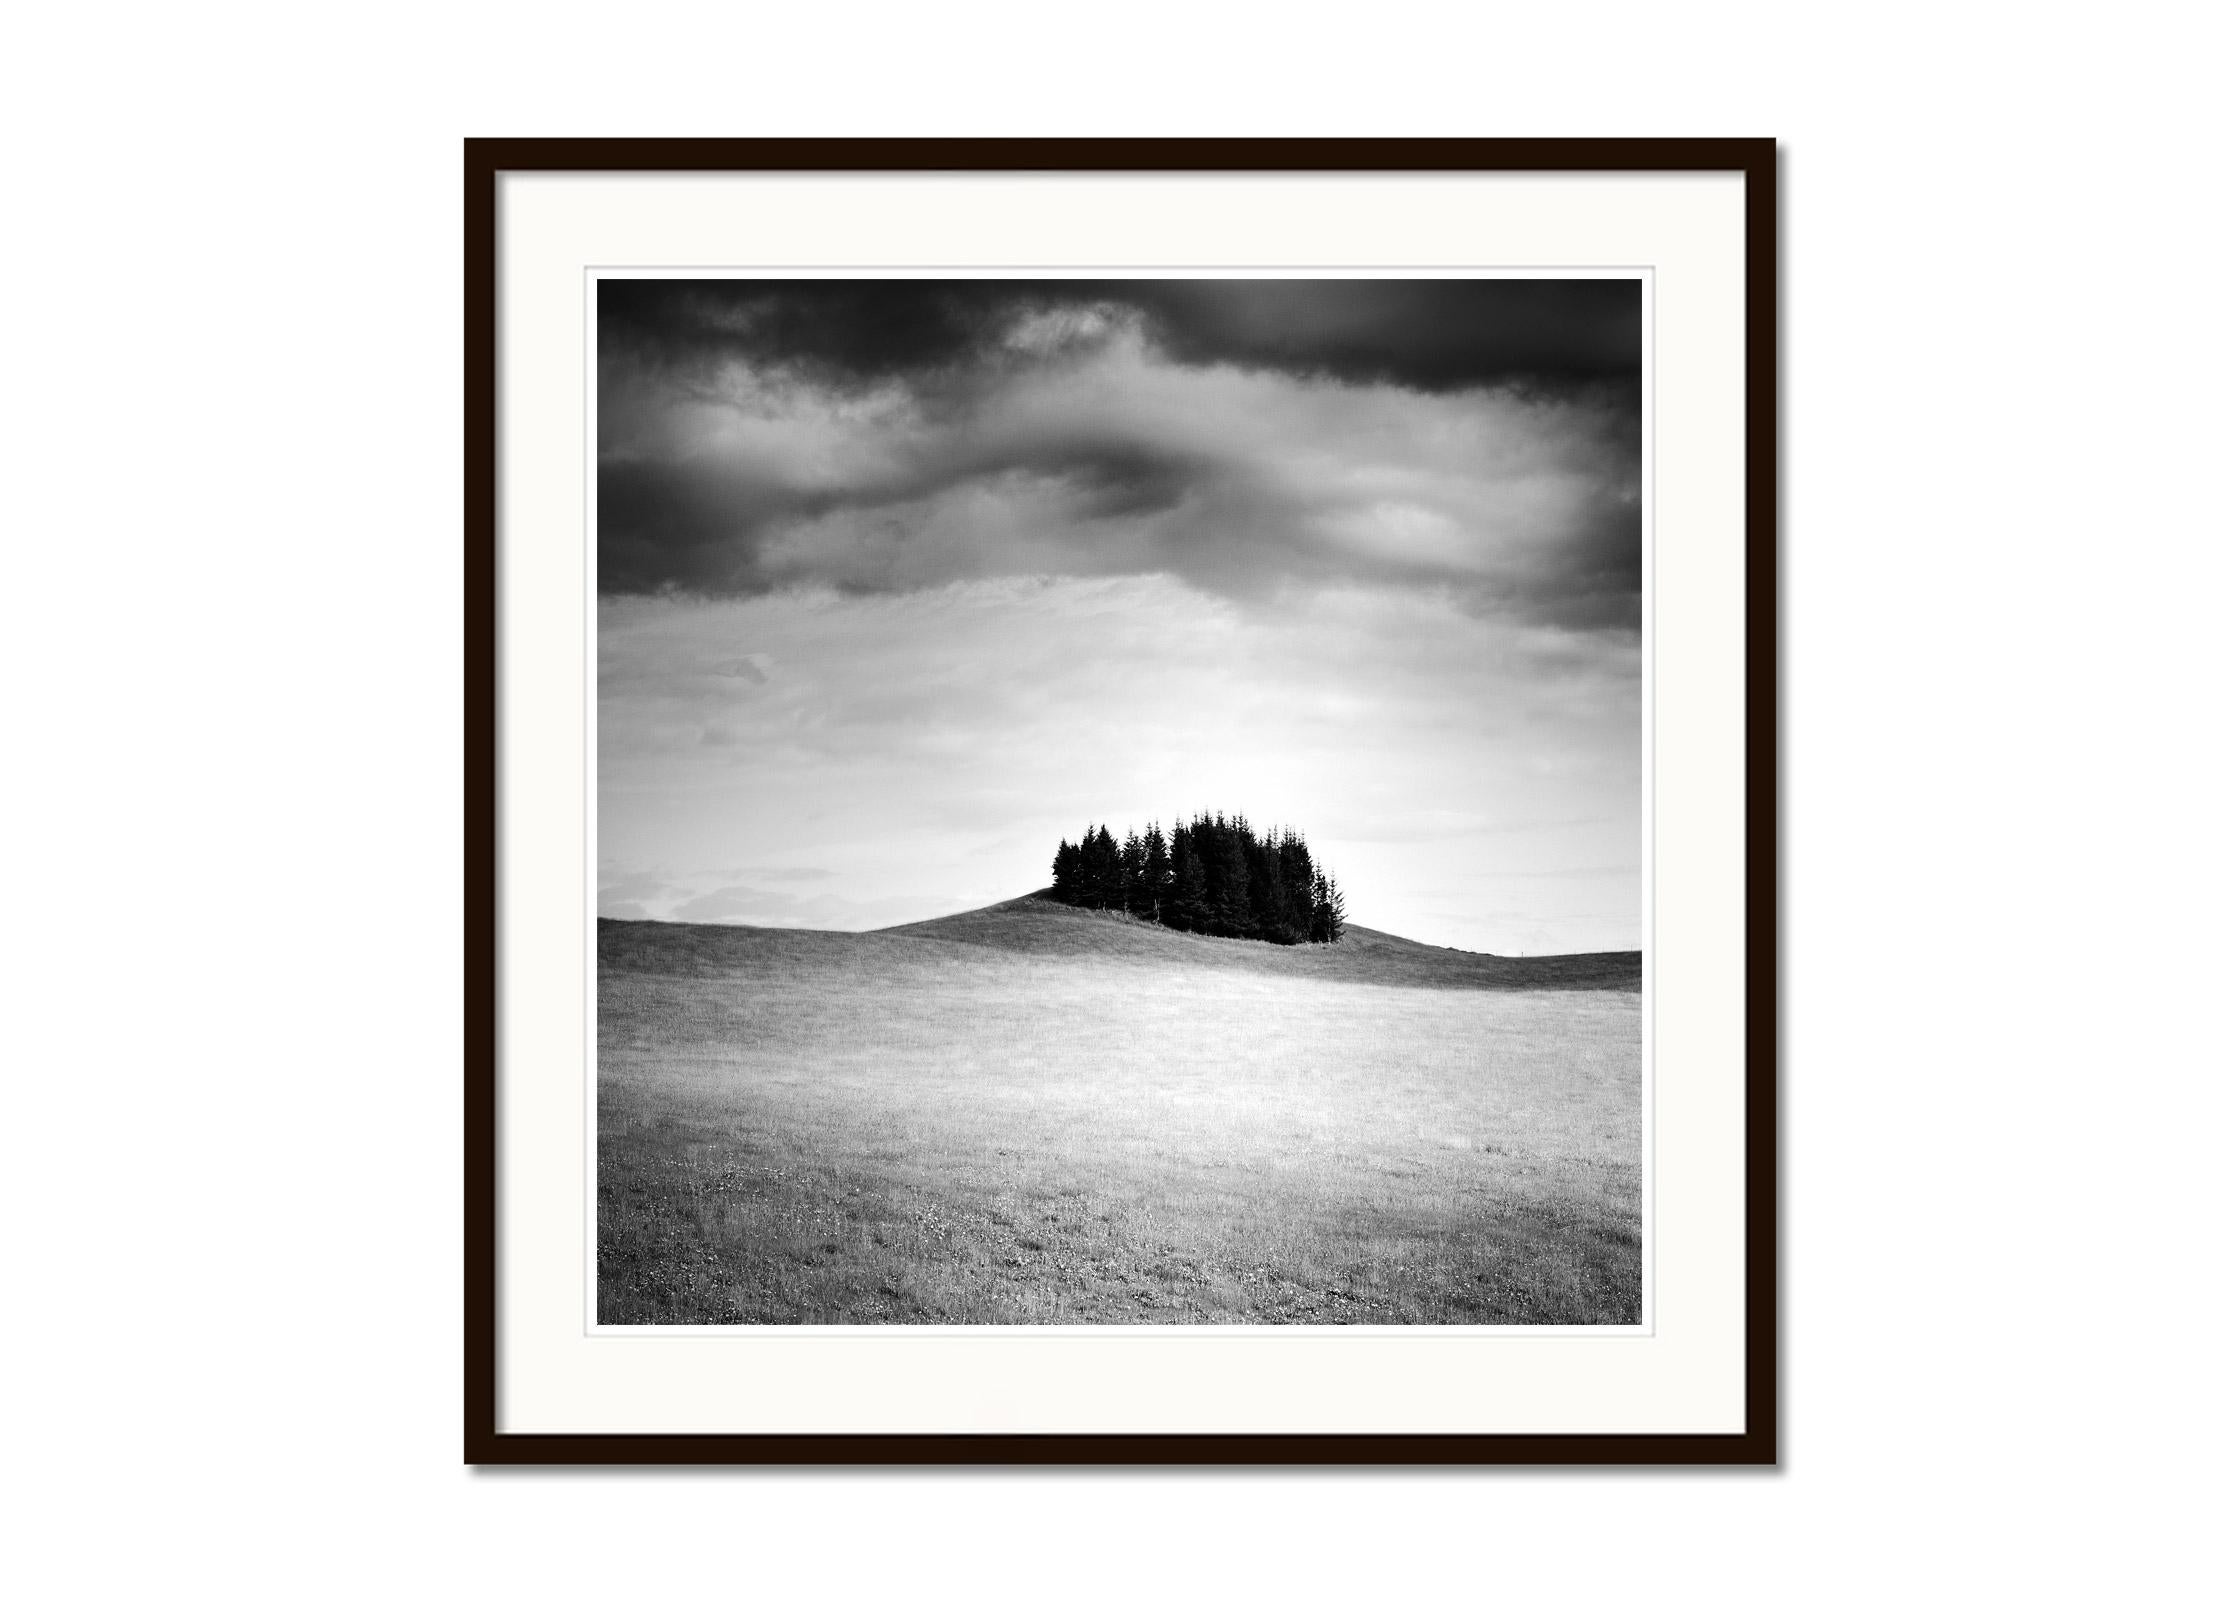 Little Green Island, Iceland black and white landscape, photography, fine art  - Contemporary Photograph by Gerald Berghammer, Ina Forstinger